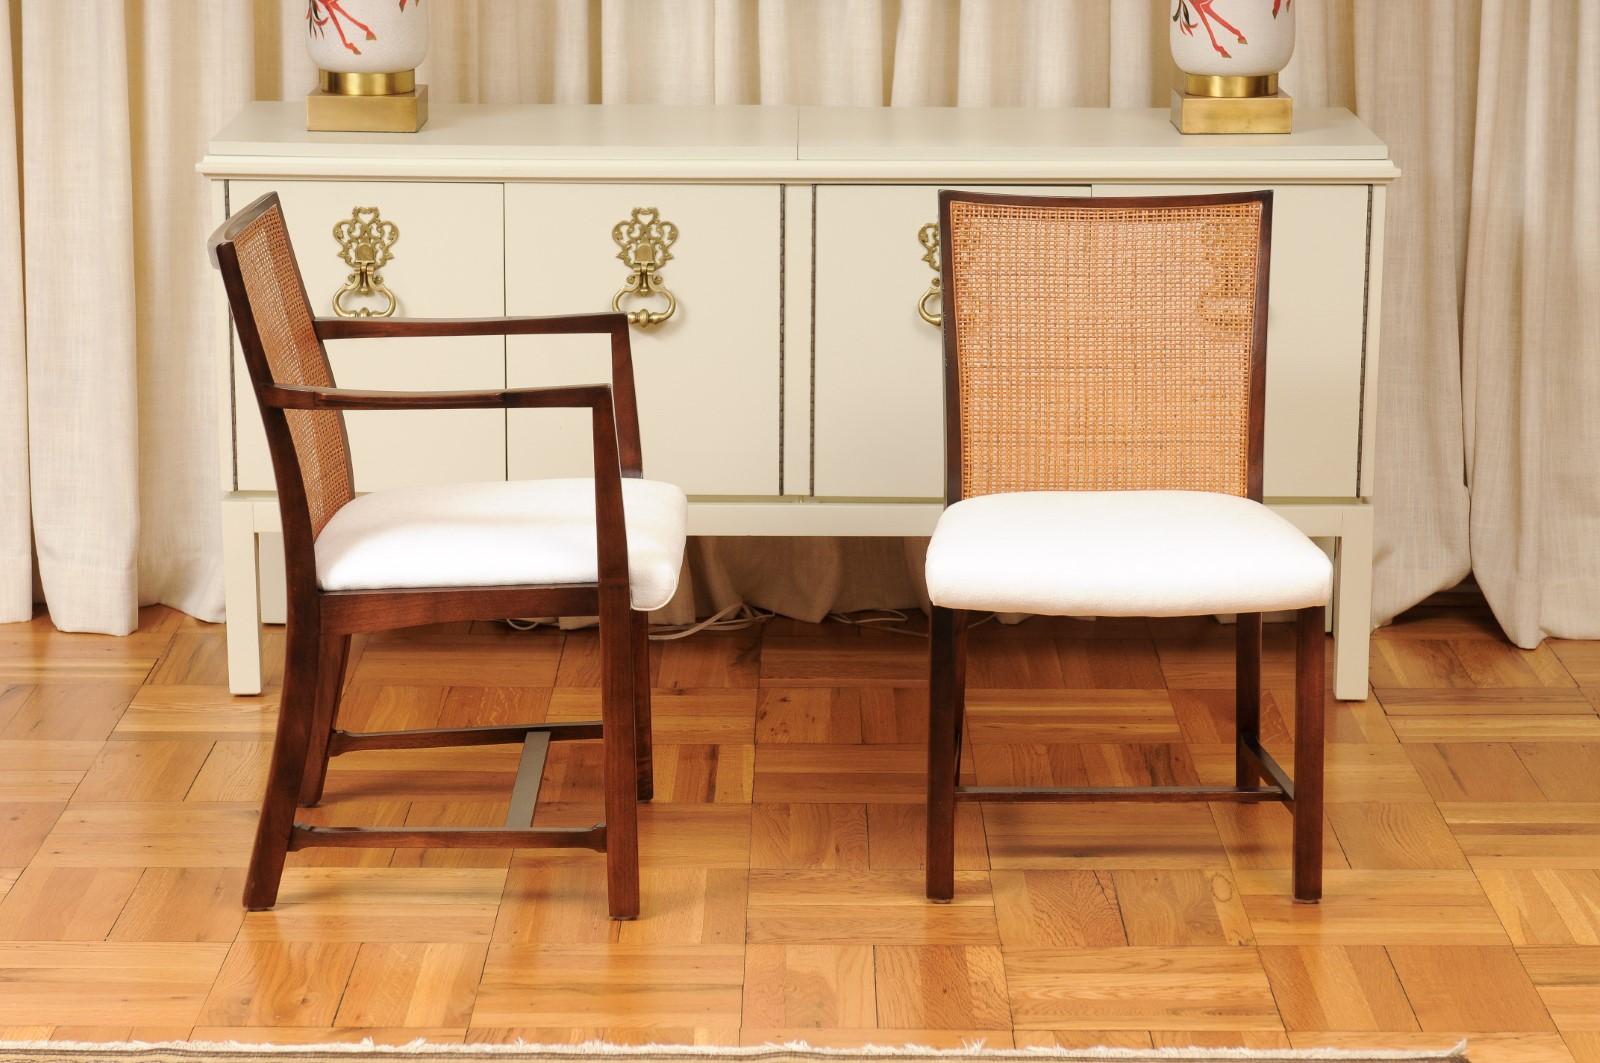 Mid-20th Century Superb Restored Set 14 Walnut and Cane Dining Chairs by Michael Taylor For Sale